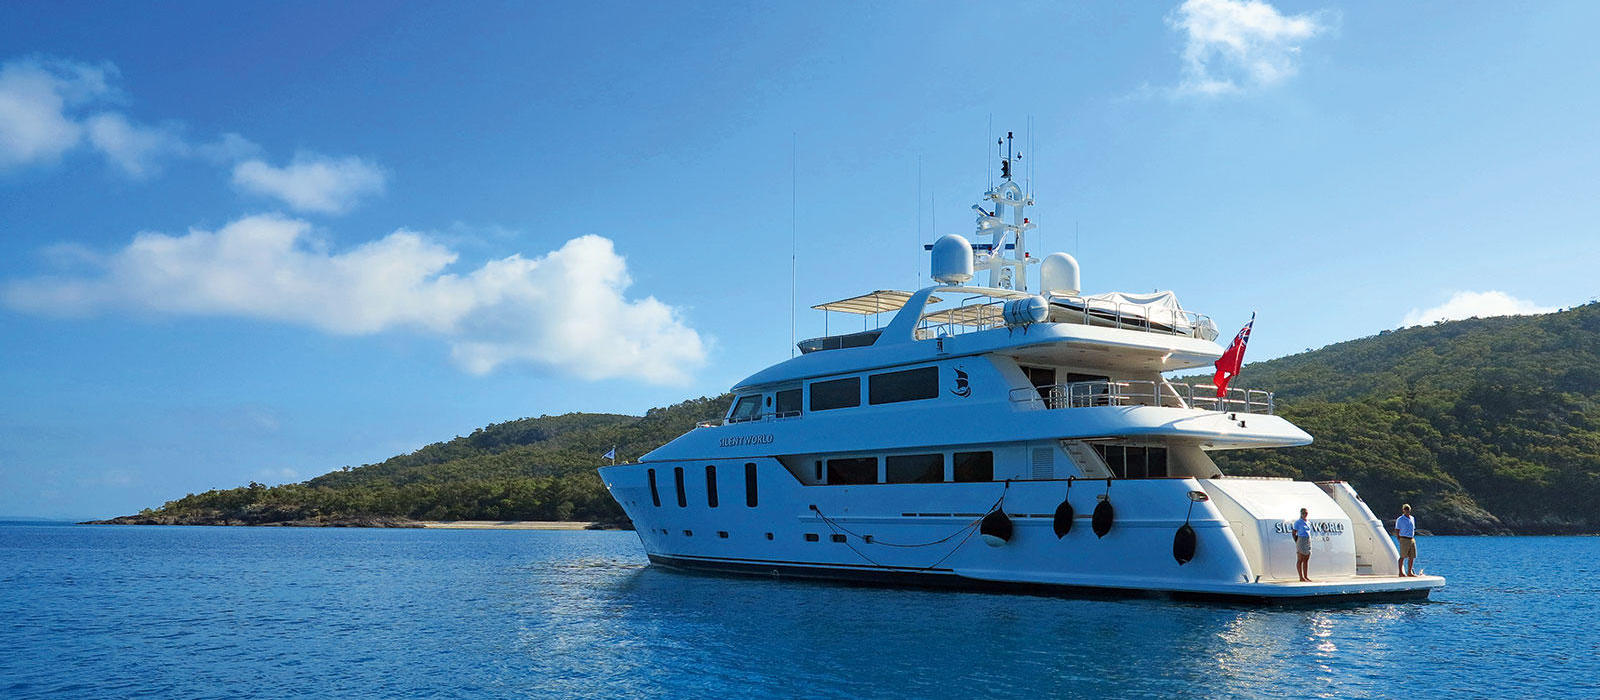 Cruise The Reef On This Super Yacht